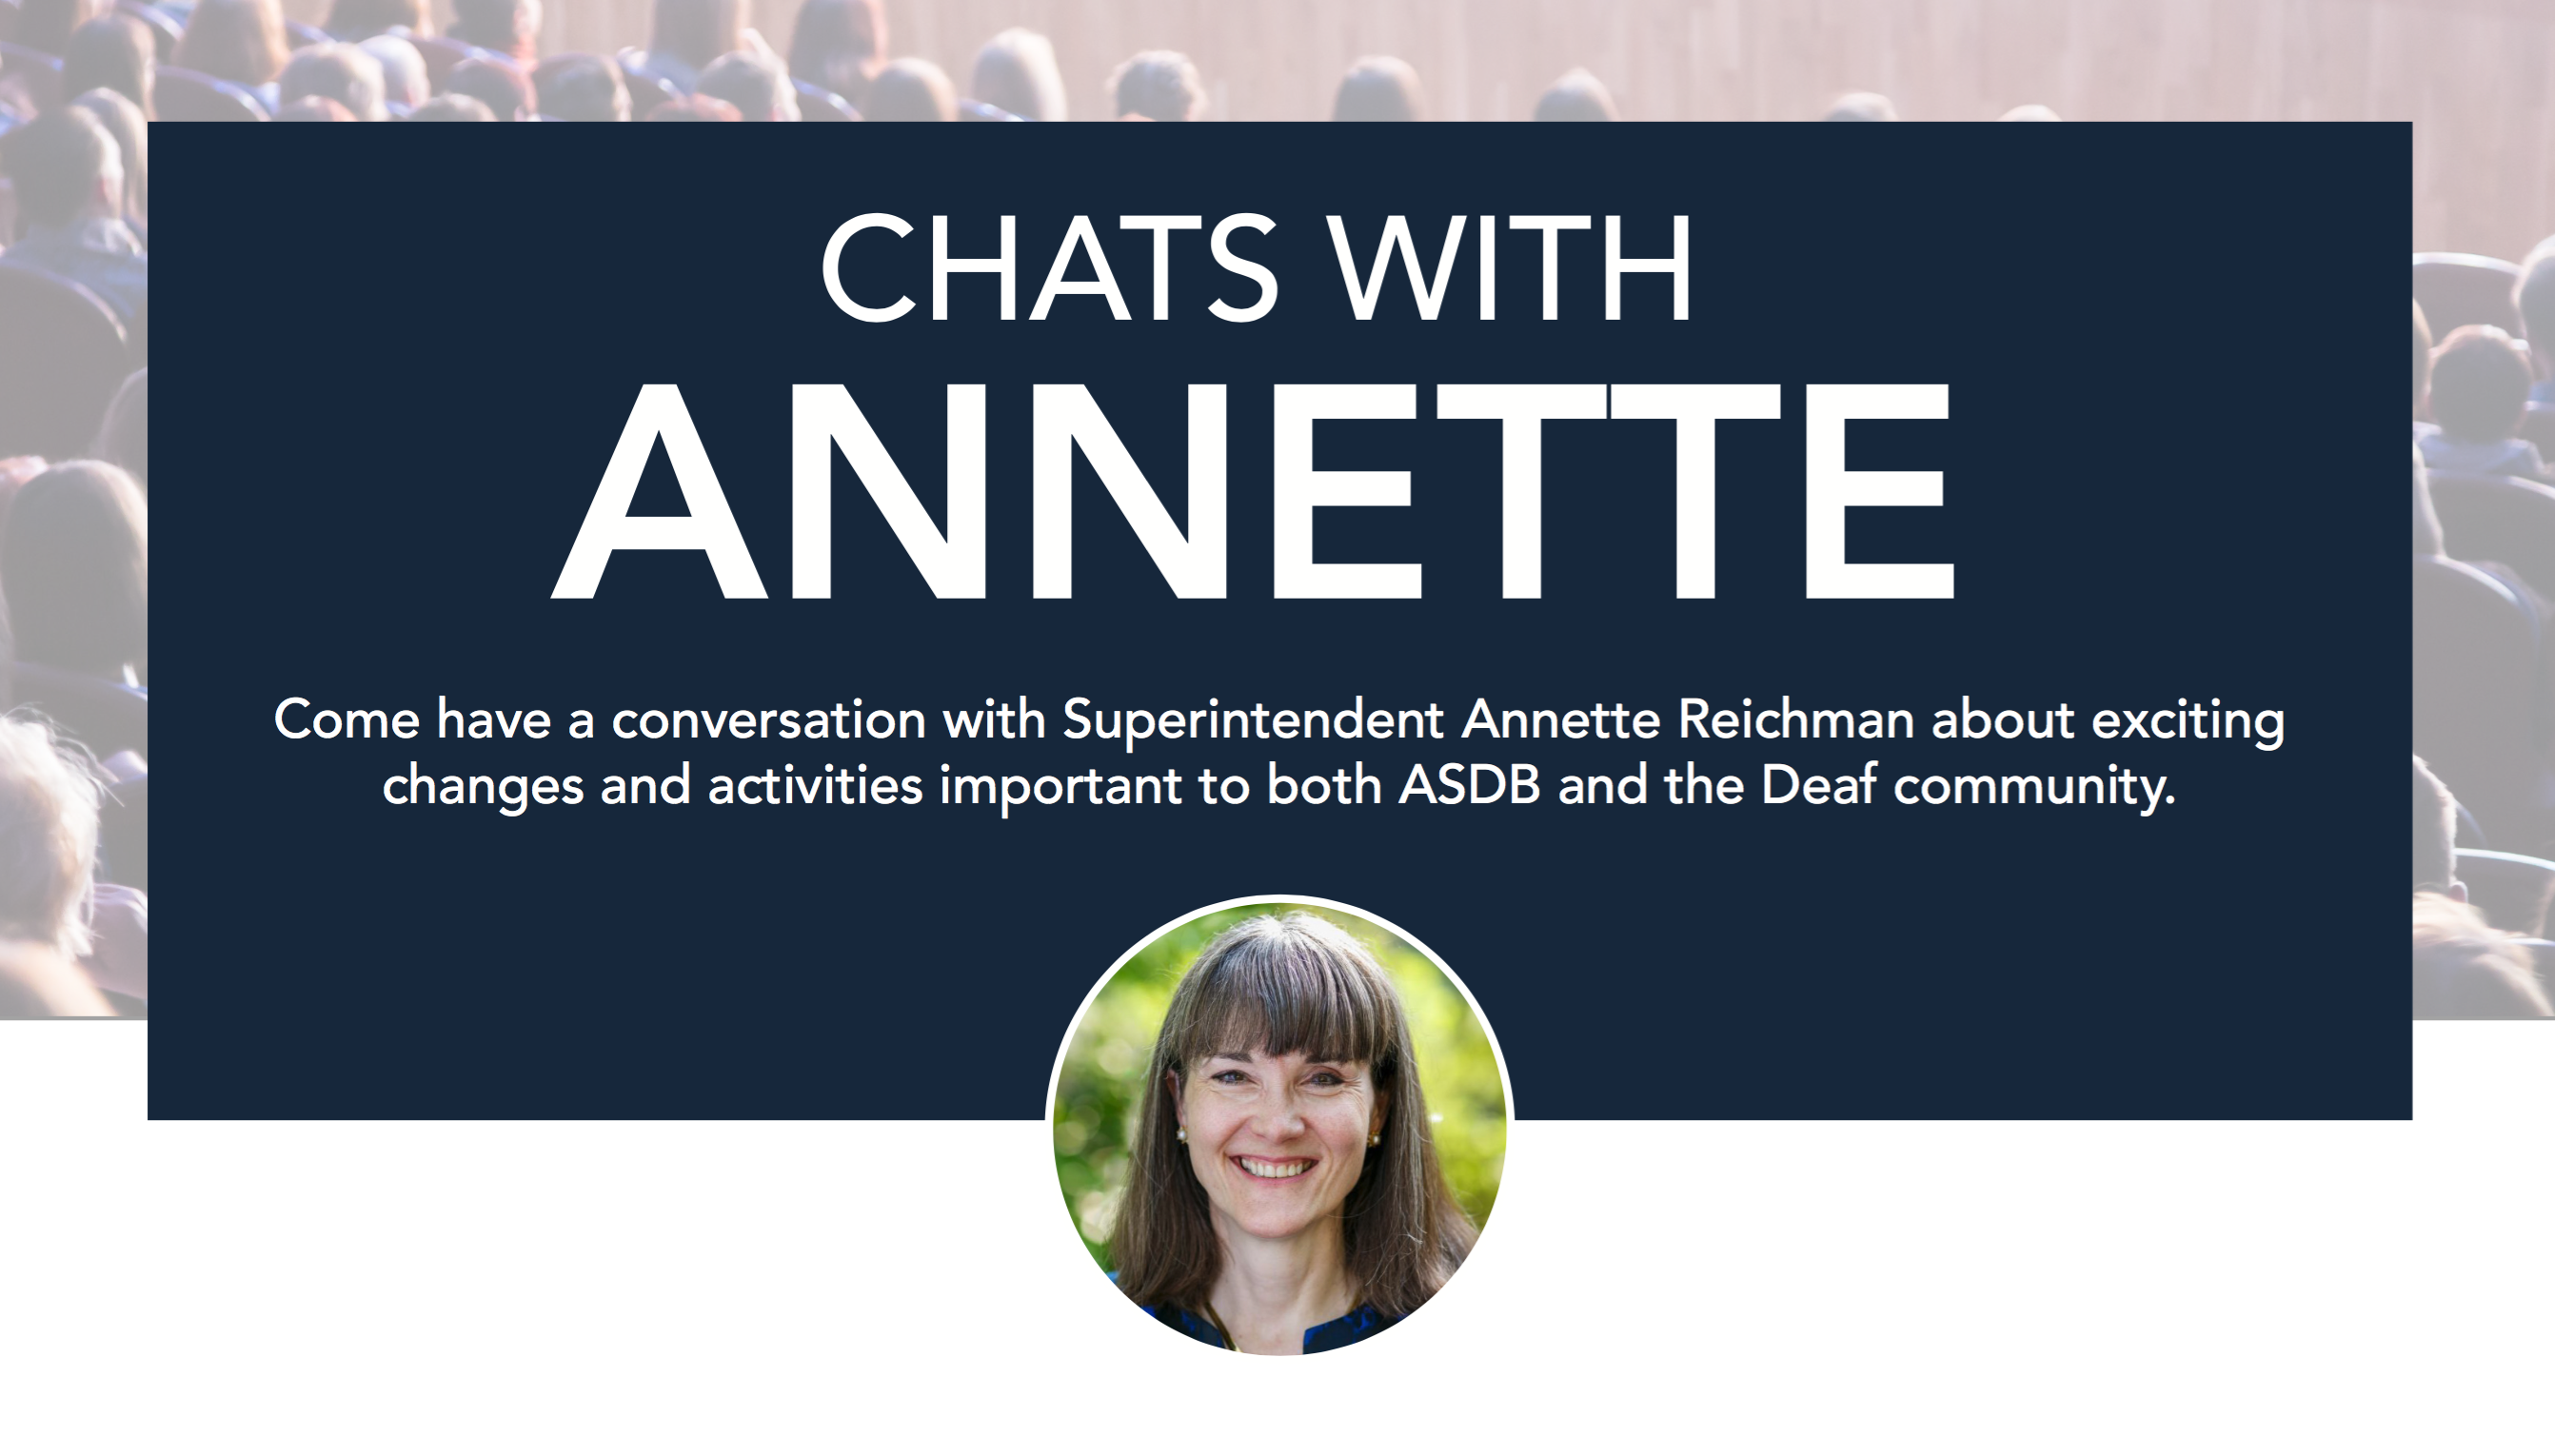 graphic with portrait of annette reichman and text about chats with Annette advertised